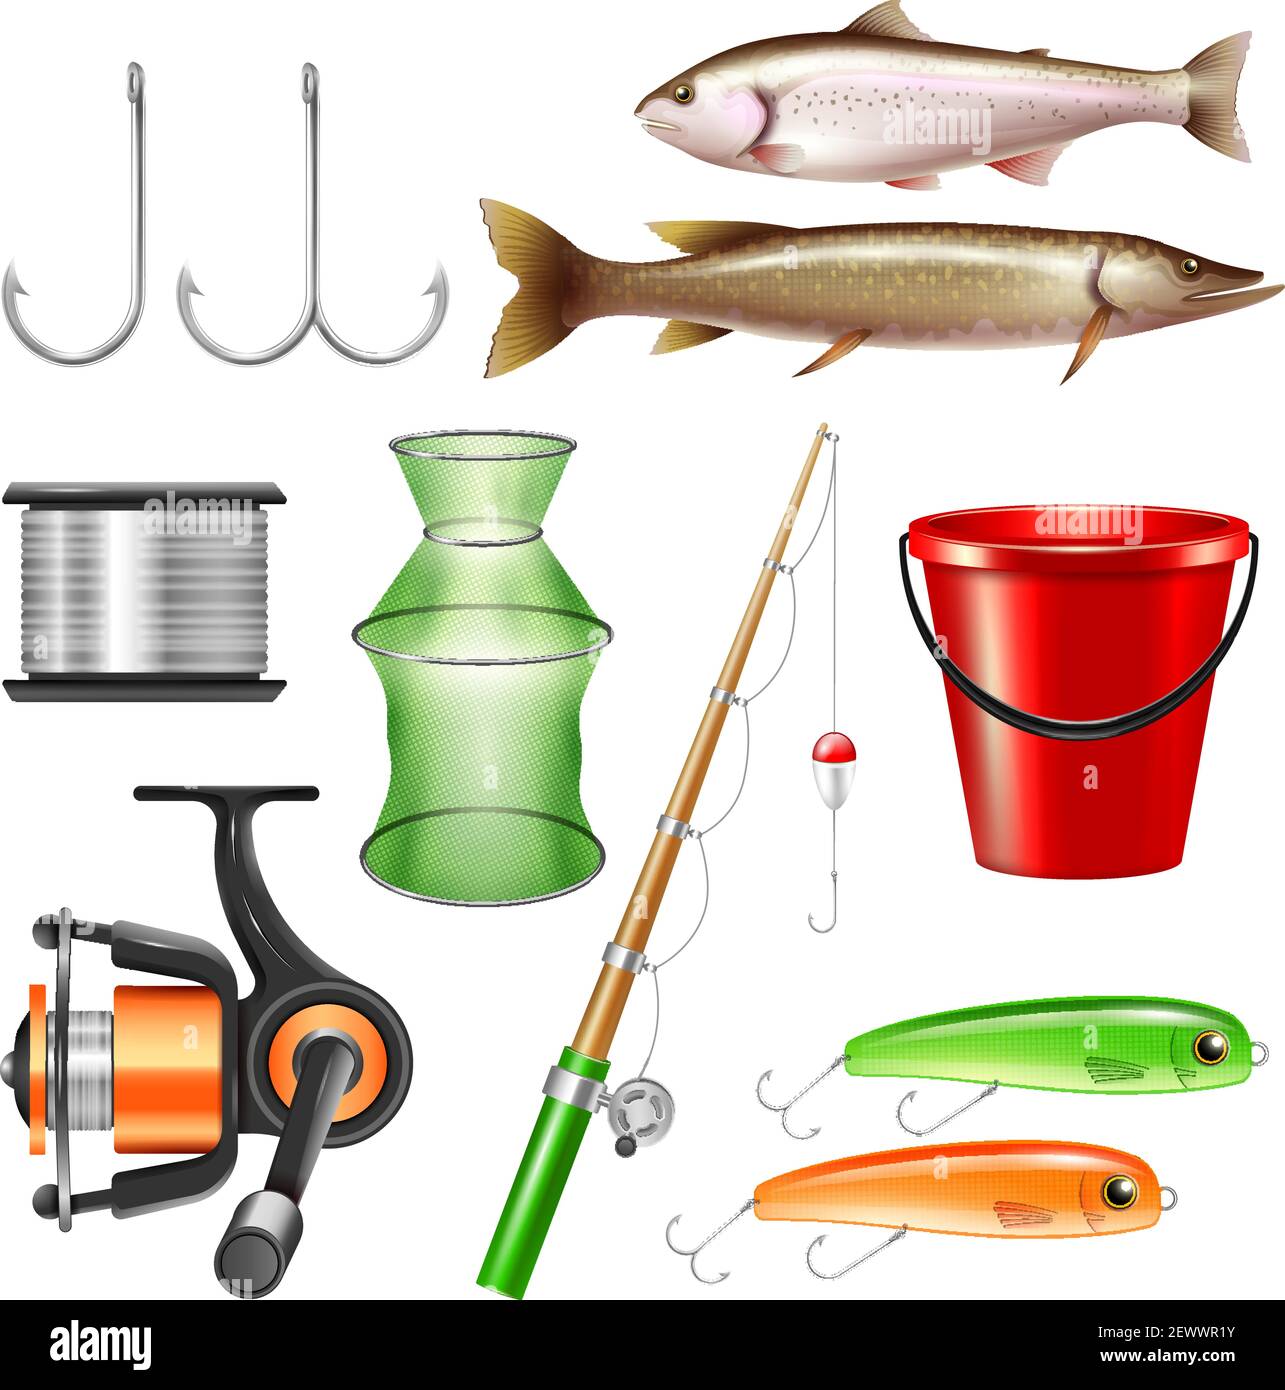 https://c8.alamy.com/comp/2EWWR1Y/realistic-fishing-set-with-isolated-images-of-fish-tackle-and-pieces-of-equipment-on-blank-background-vector-illustration-2EWWR1Y.jpg